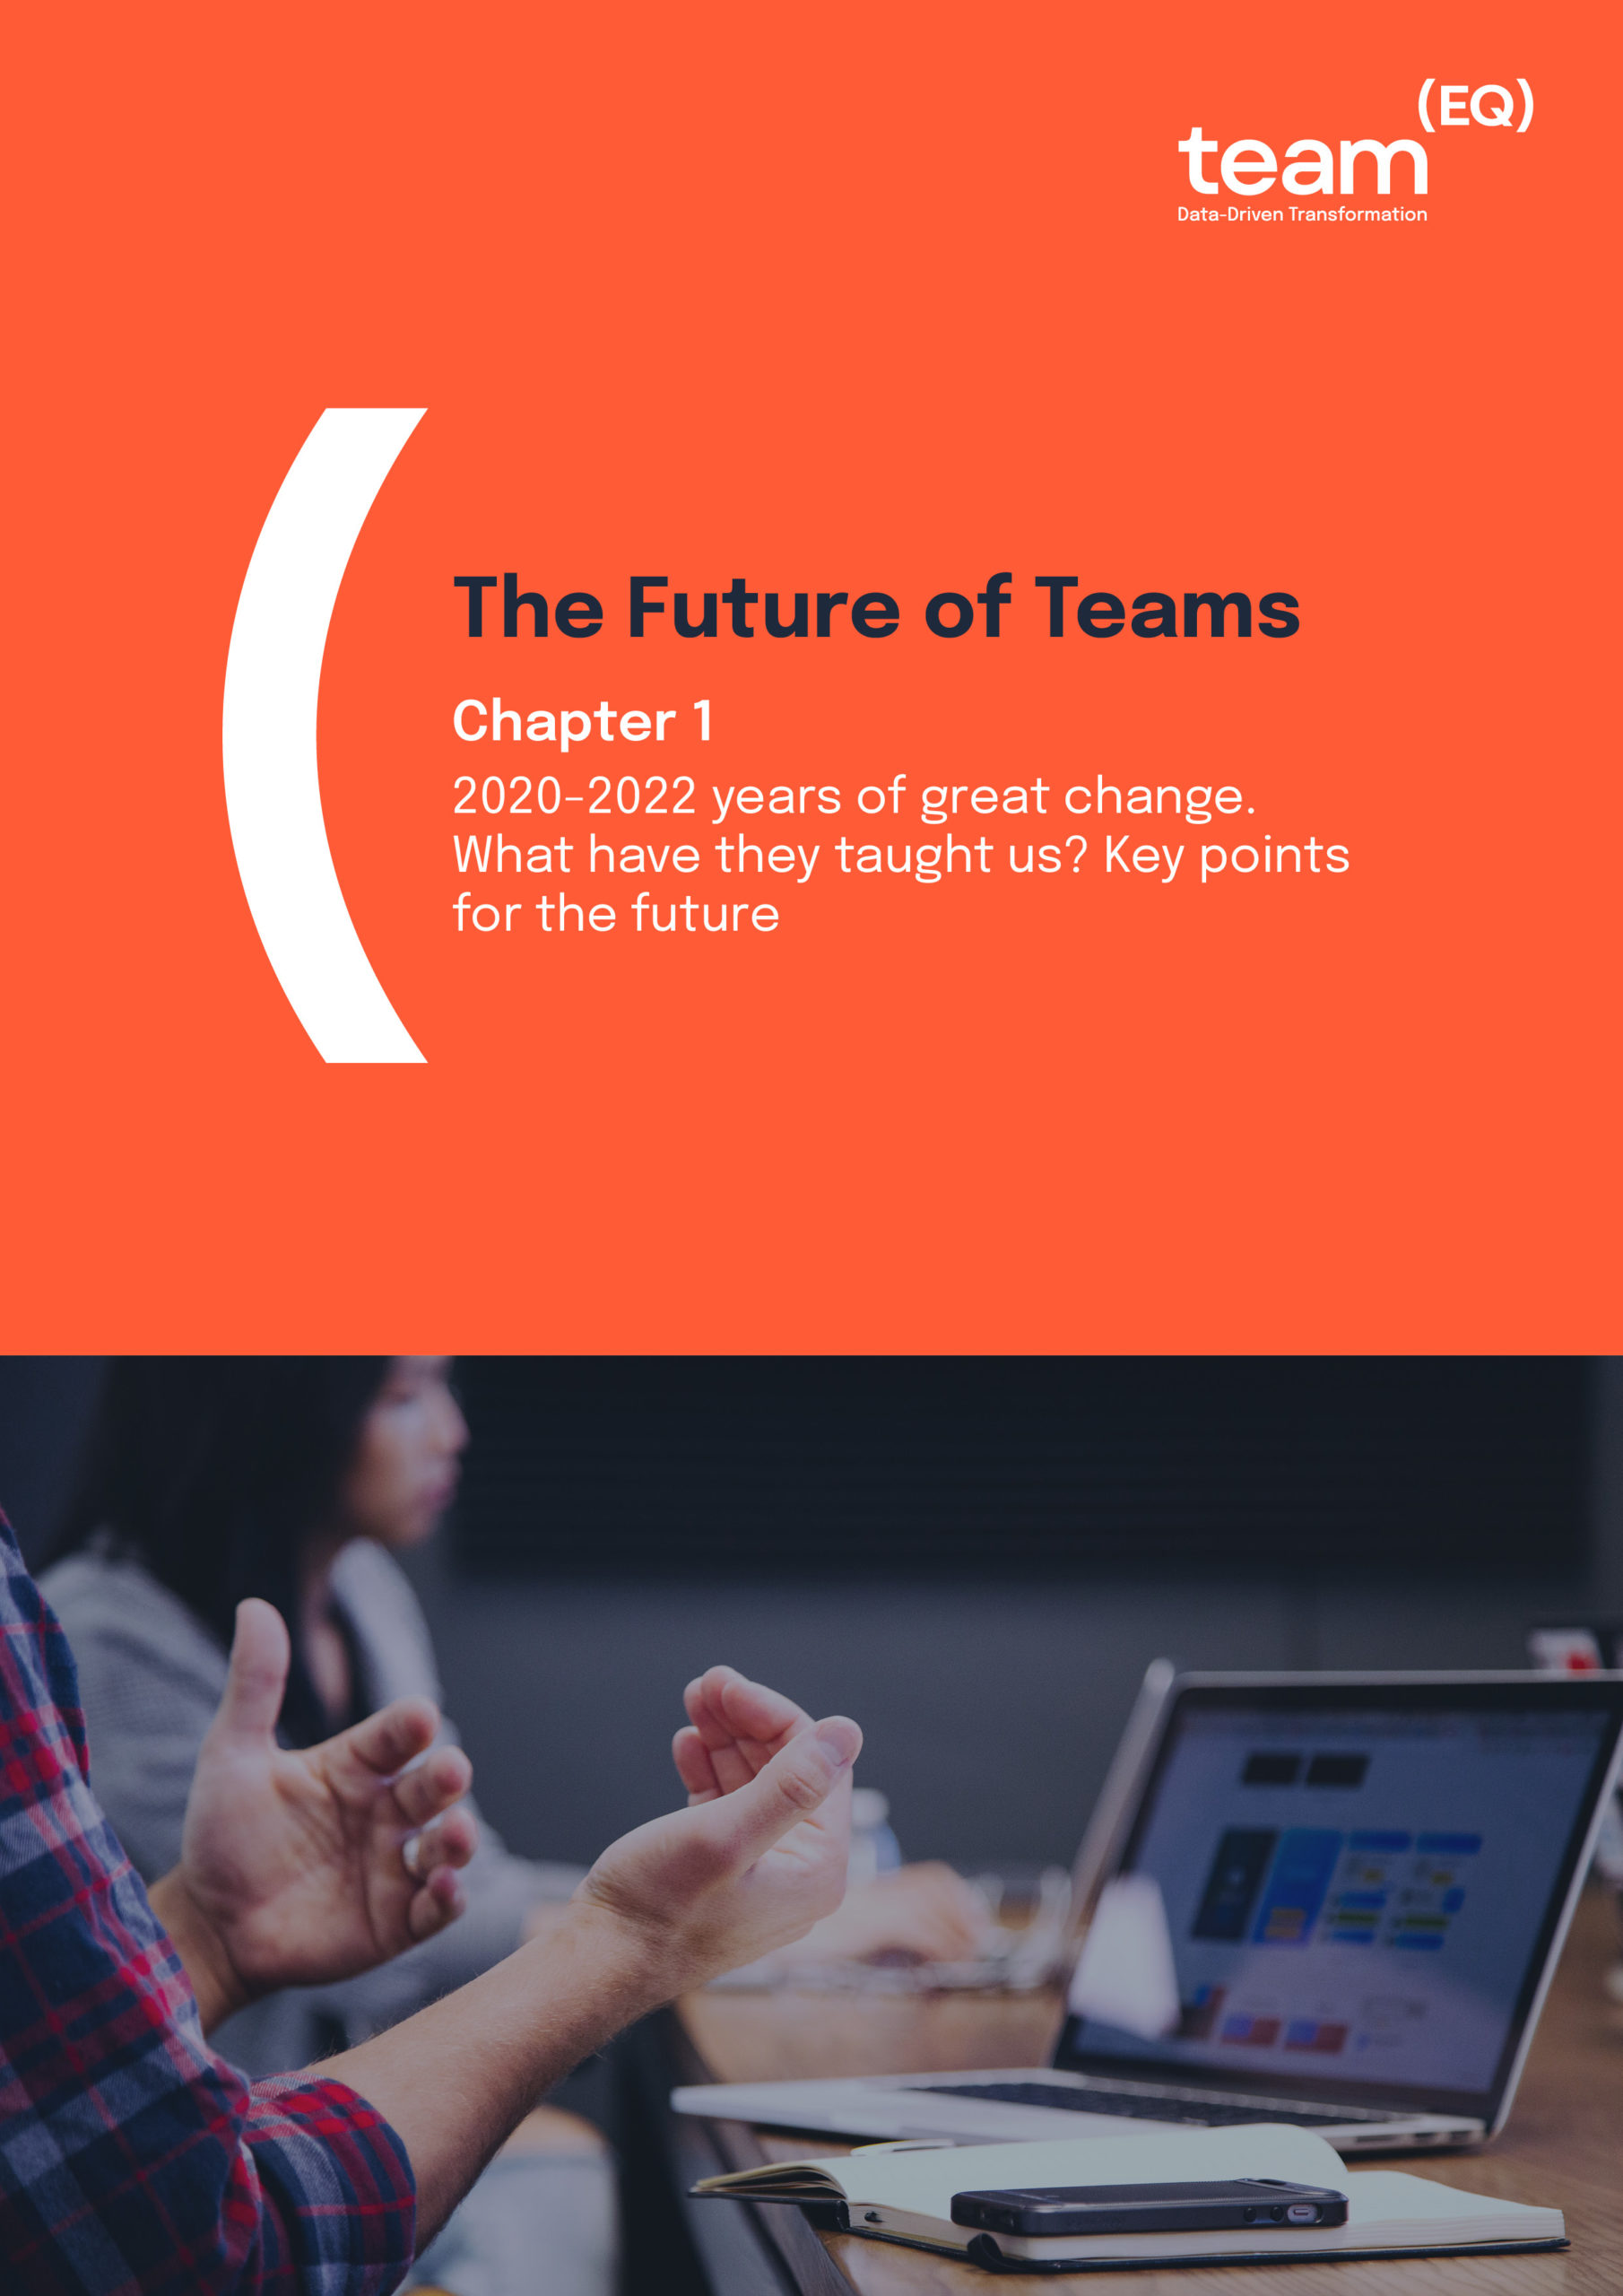 TeamEQ - The Future of Teams - Chapter 1